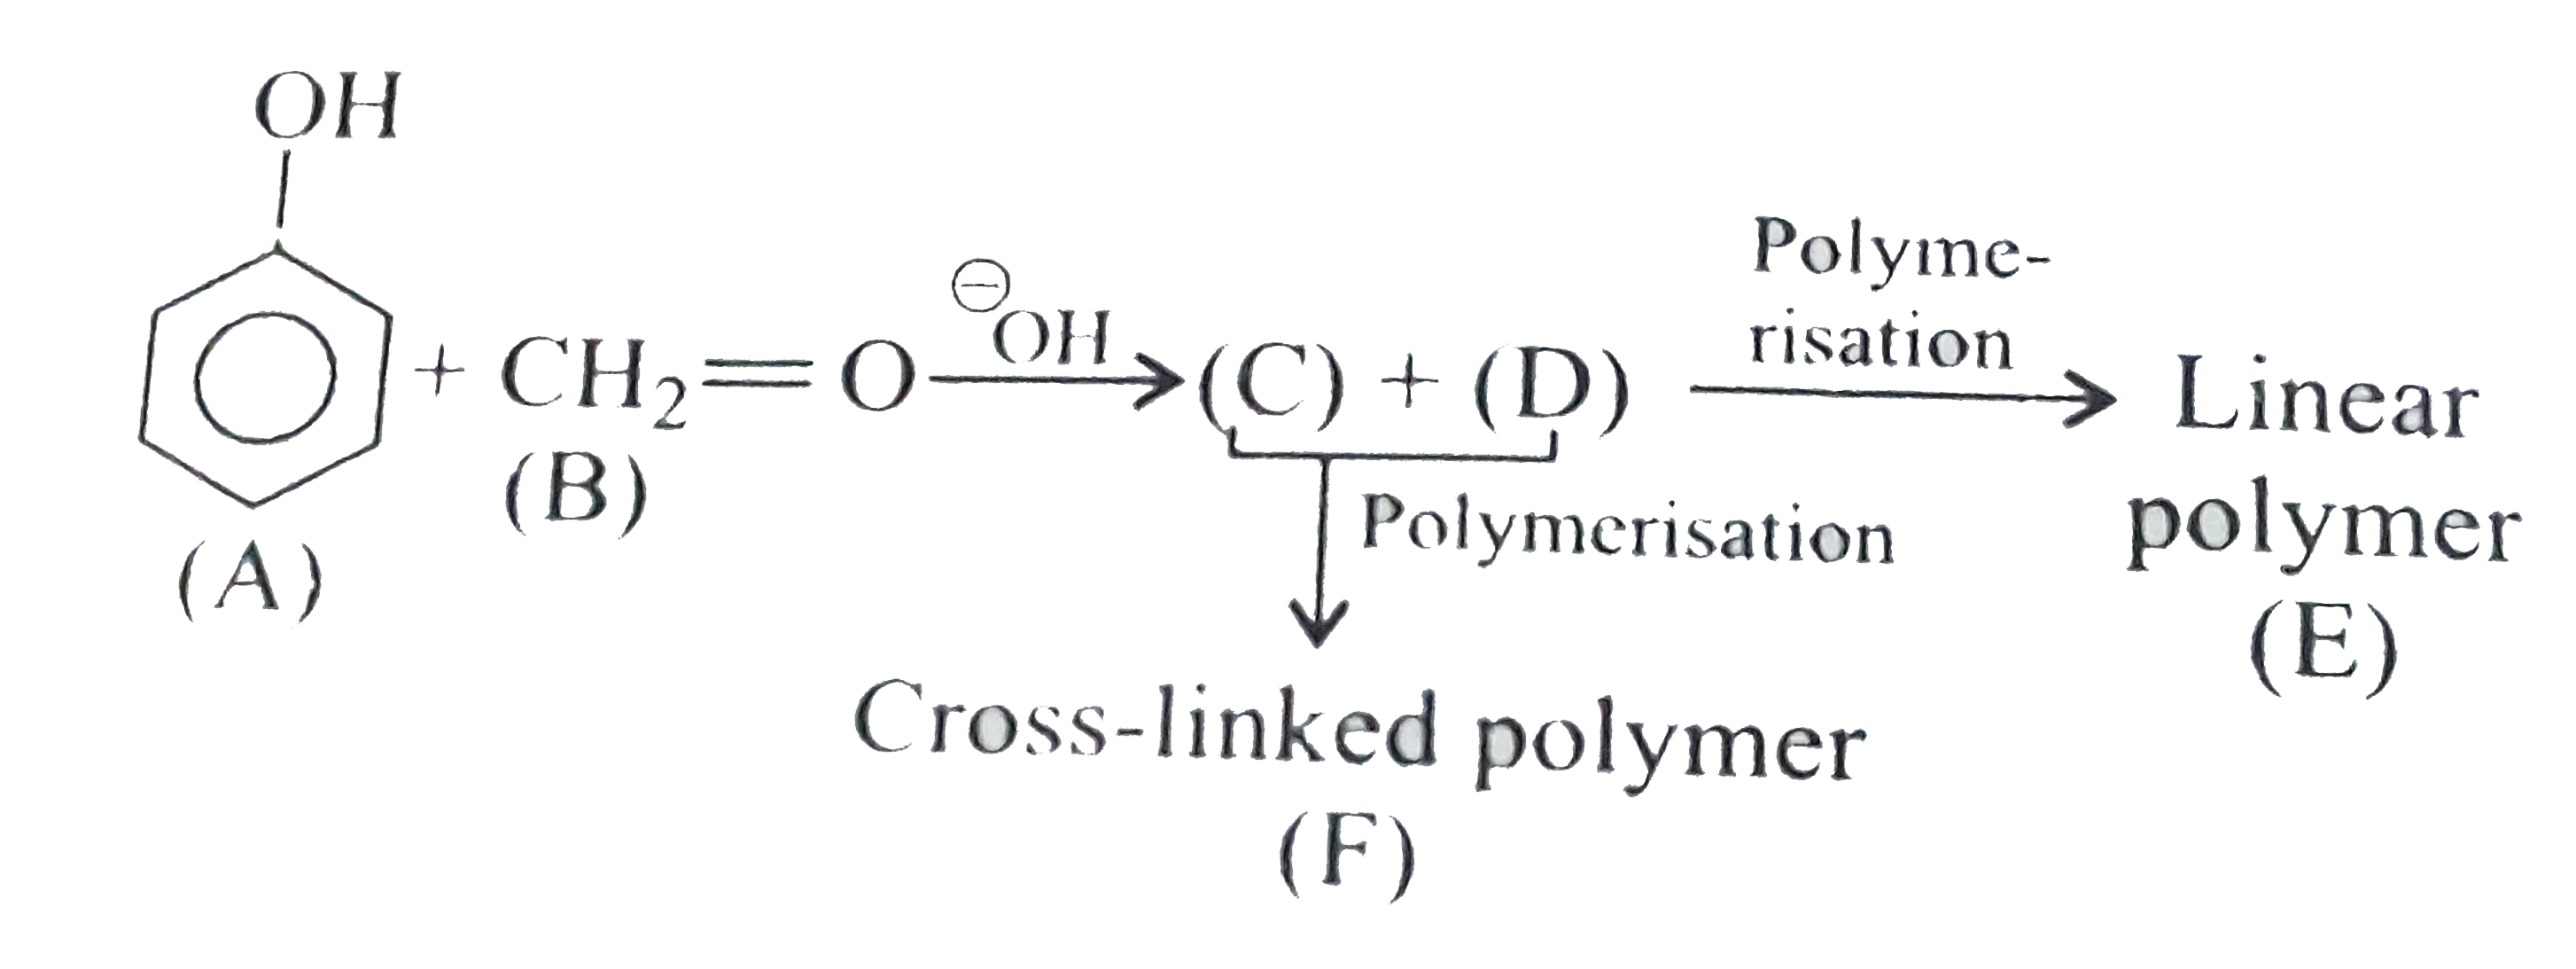 The cross-linked polymer(F)is: